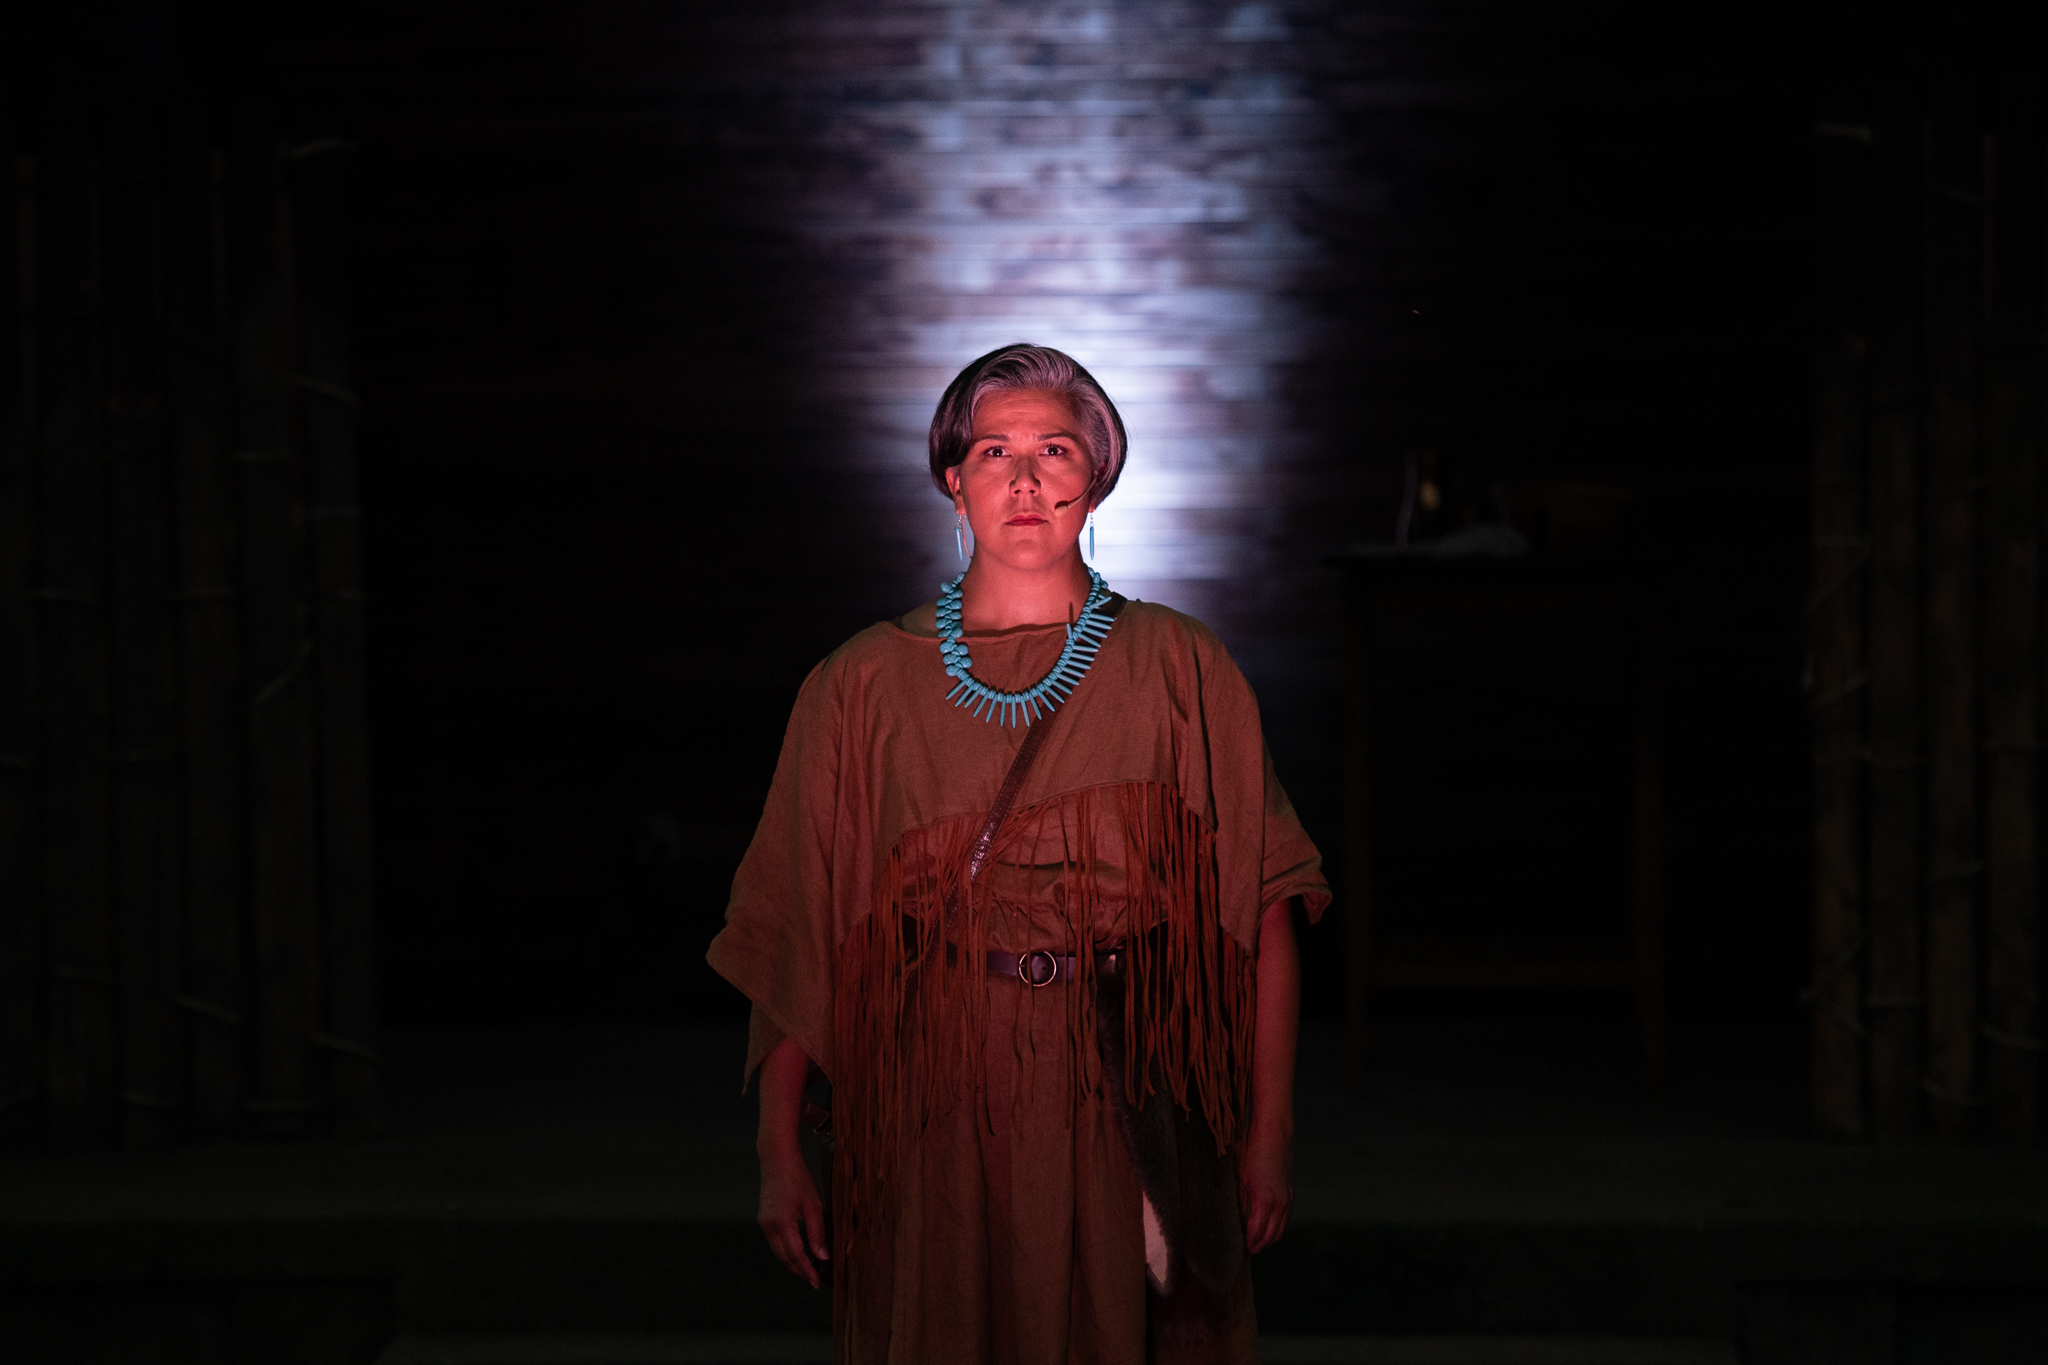 Otîhêw, portrayed by Nicole Joy-Fraser, stands strong surrounded by darkness.